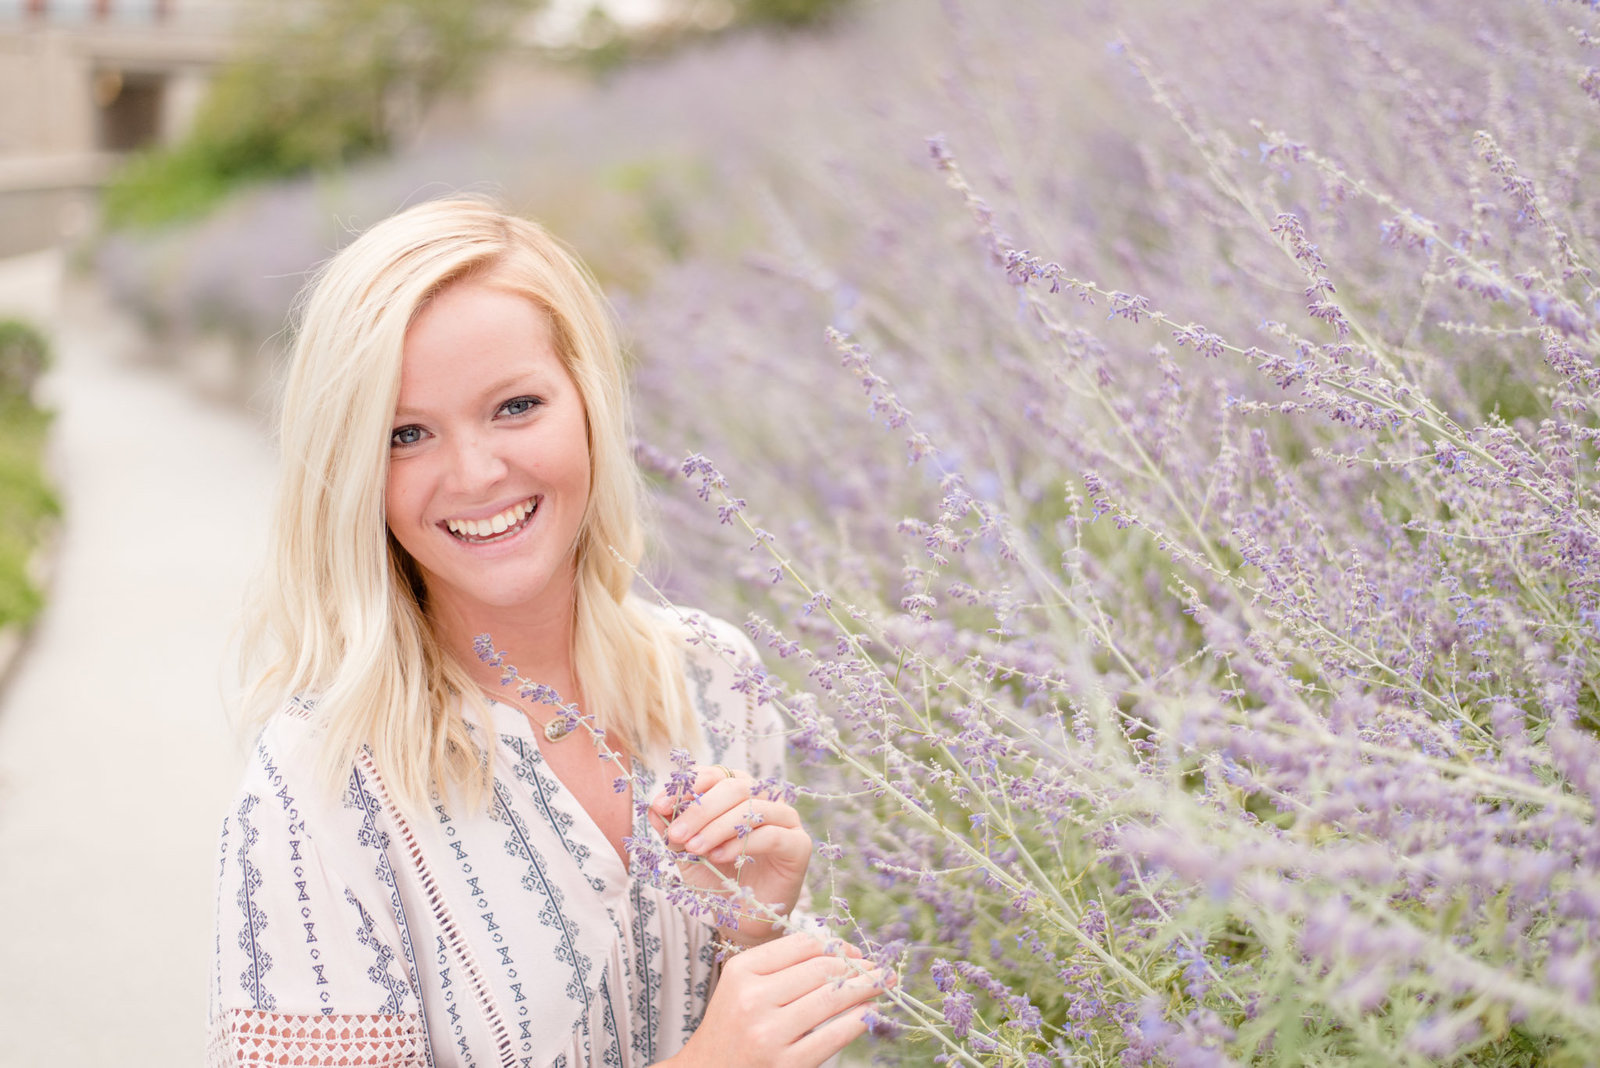 Girl holds lavender and smiles